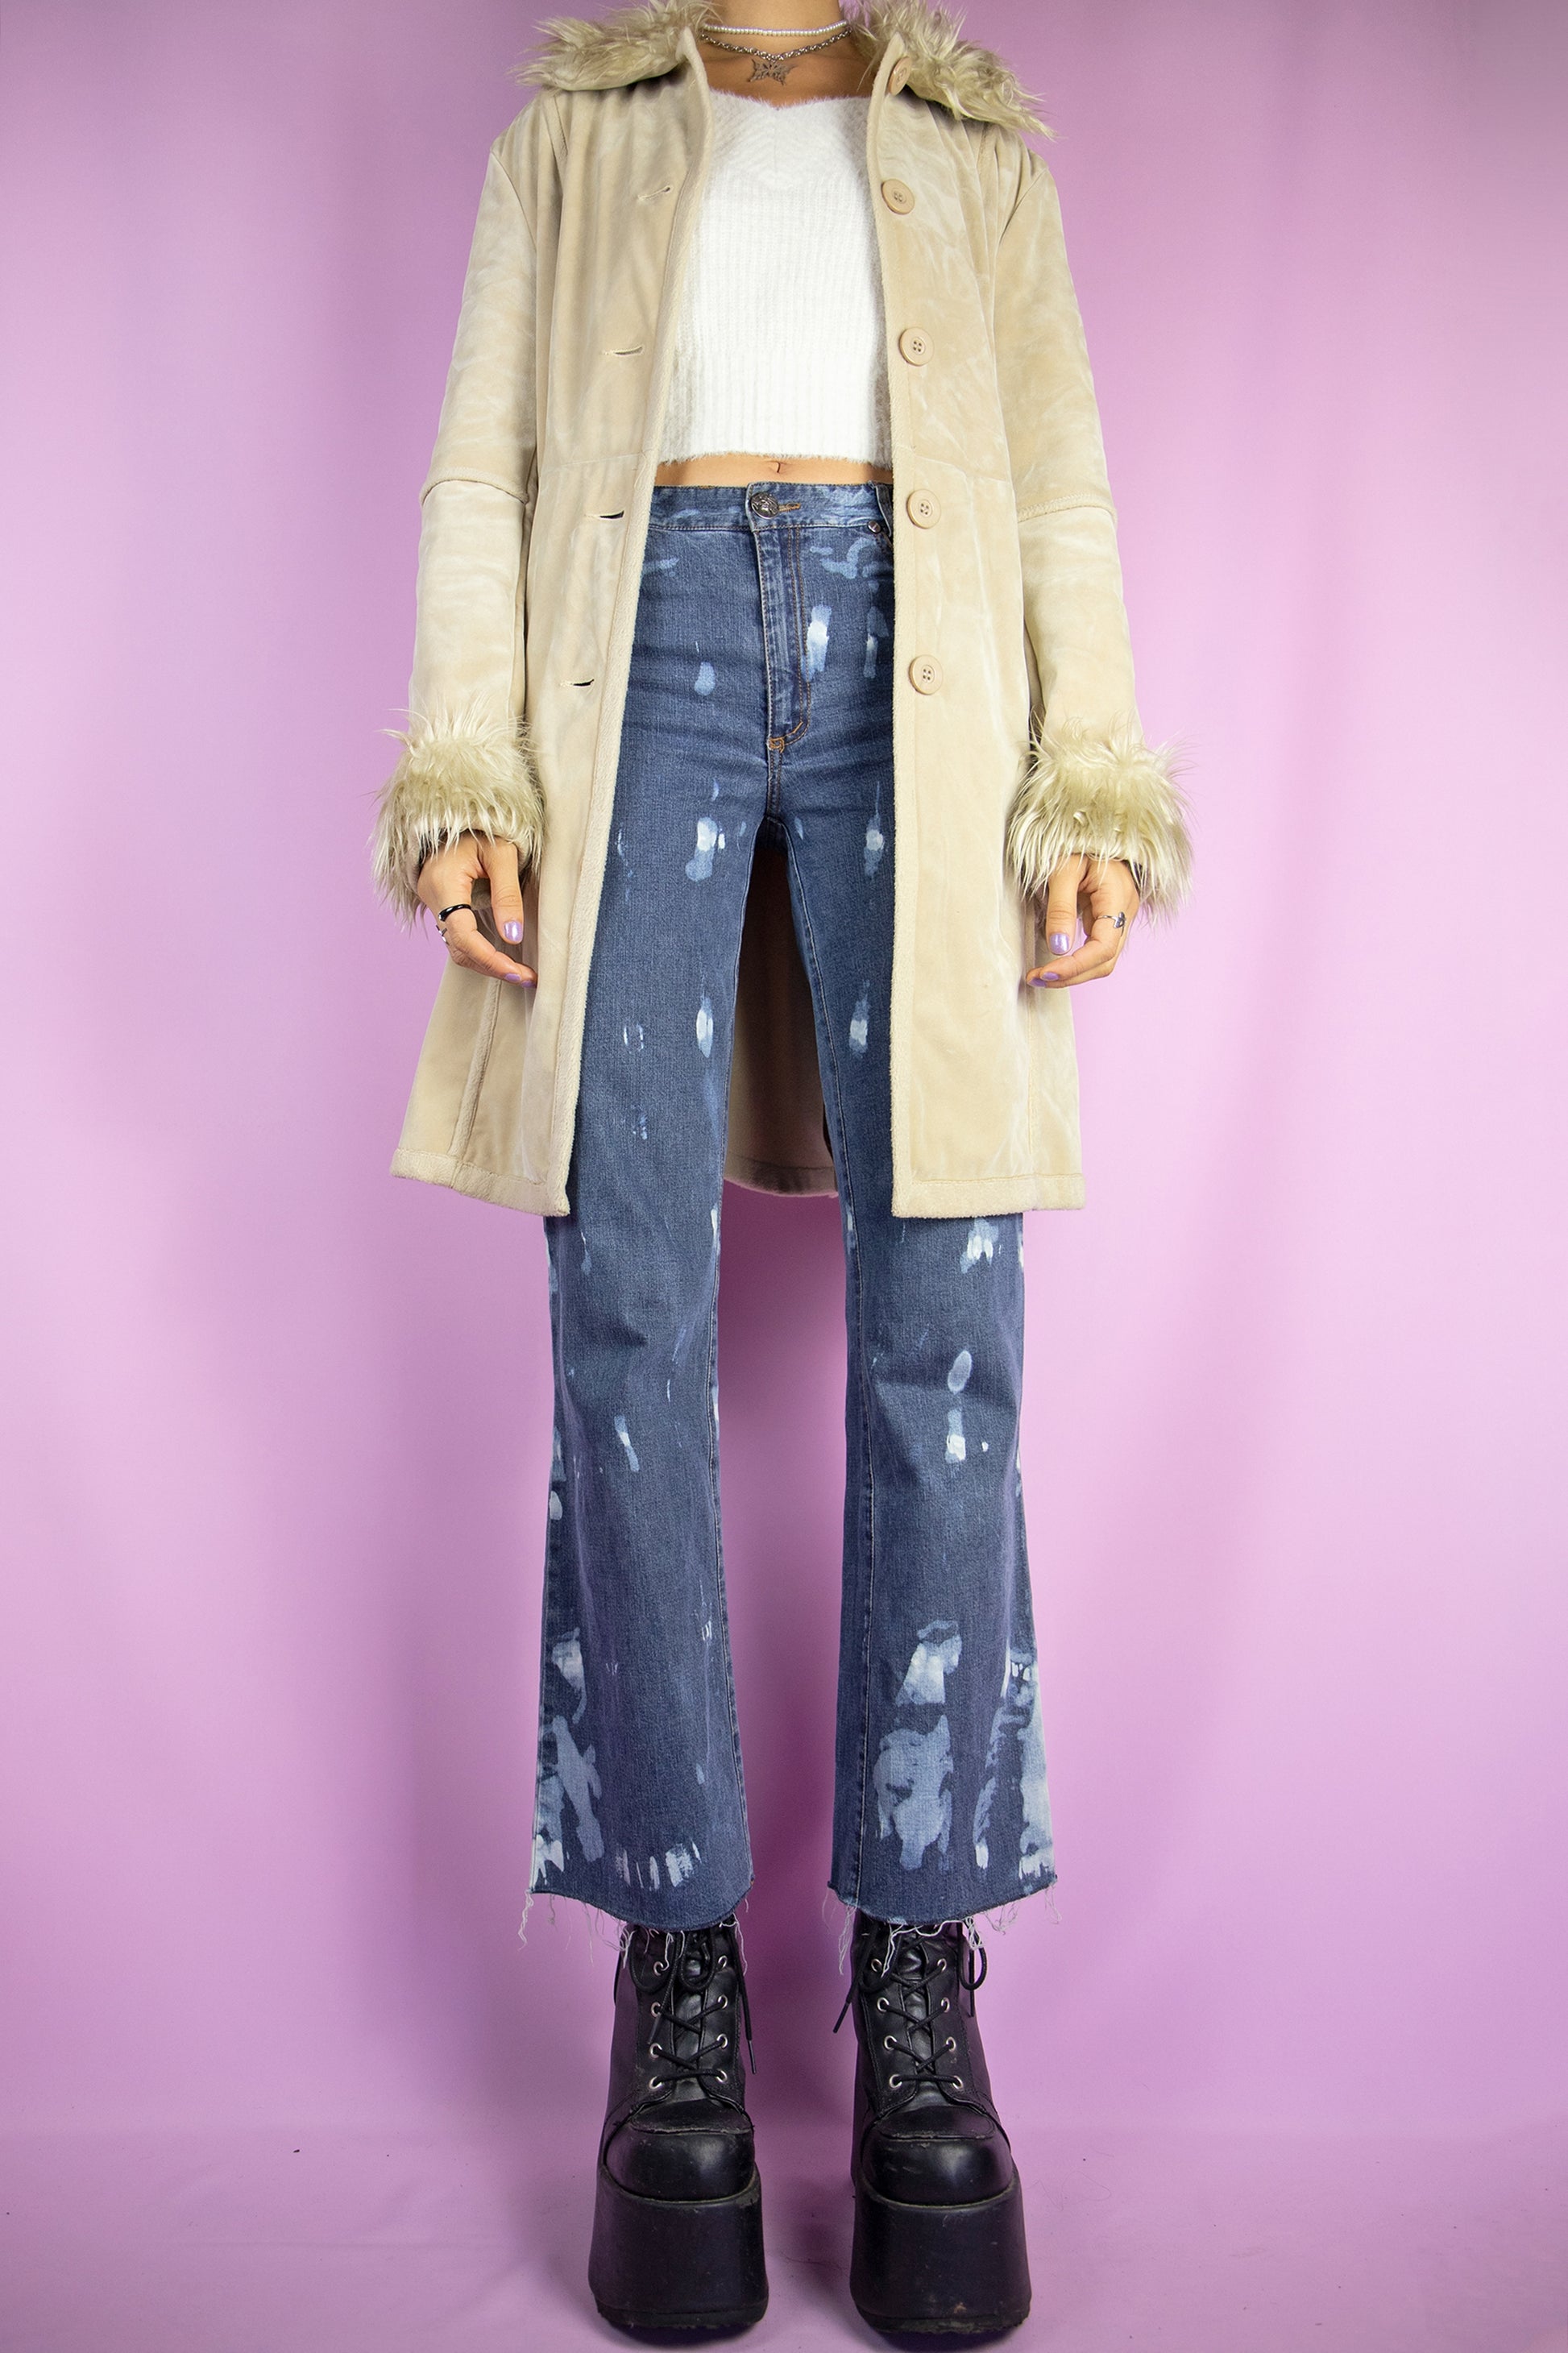 The Y2K Beige Penny Lane Jacket is a vintage 2000s winter faux suede statement coat showcasing faux fur collar and cuffs, along with pockets, buttons, and a coordinating belt.